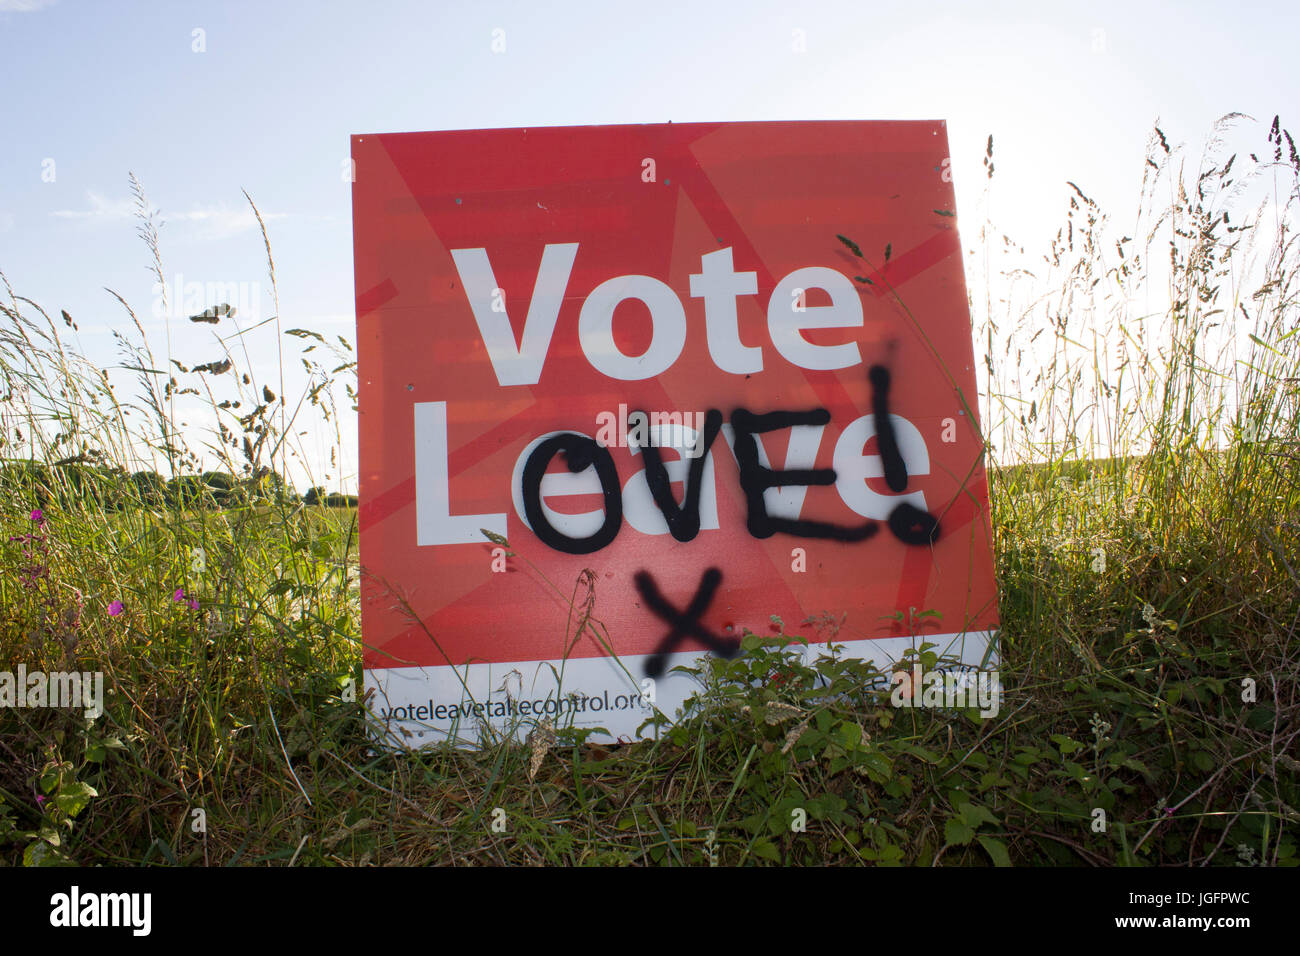 Brexit - A vote leave Europe sign that has been vandalised with graffiti to say vote love. Highlights the difference in opinion during the referendum. Stock Photo